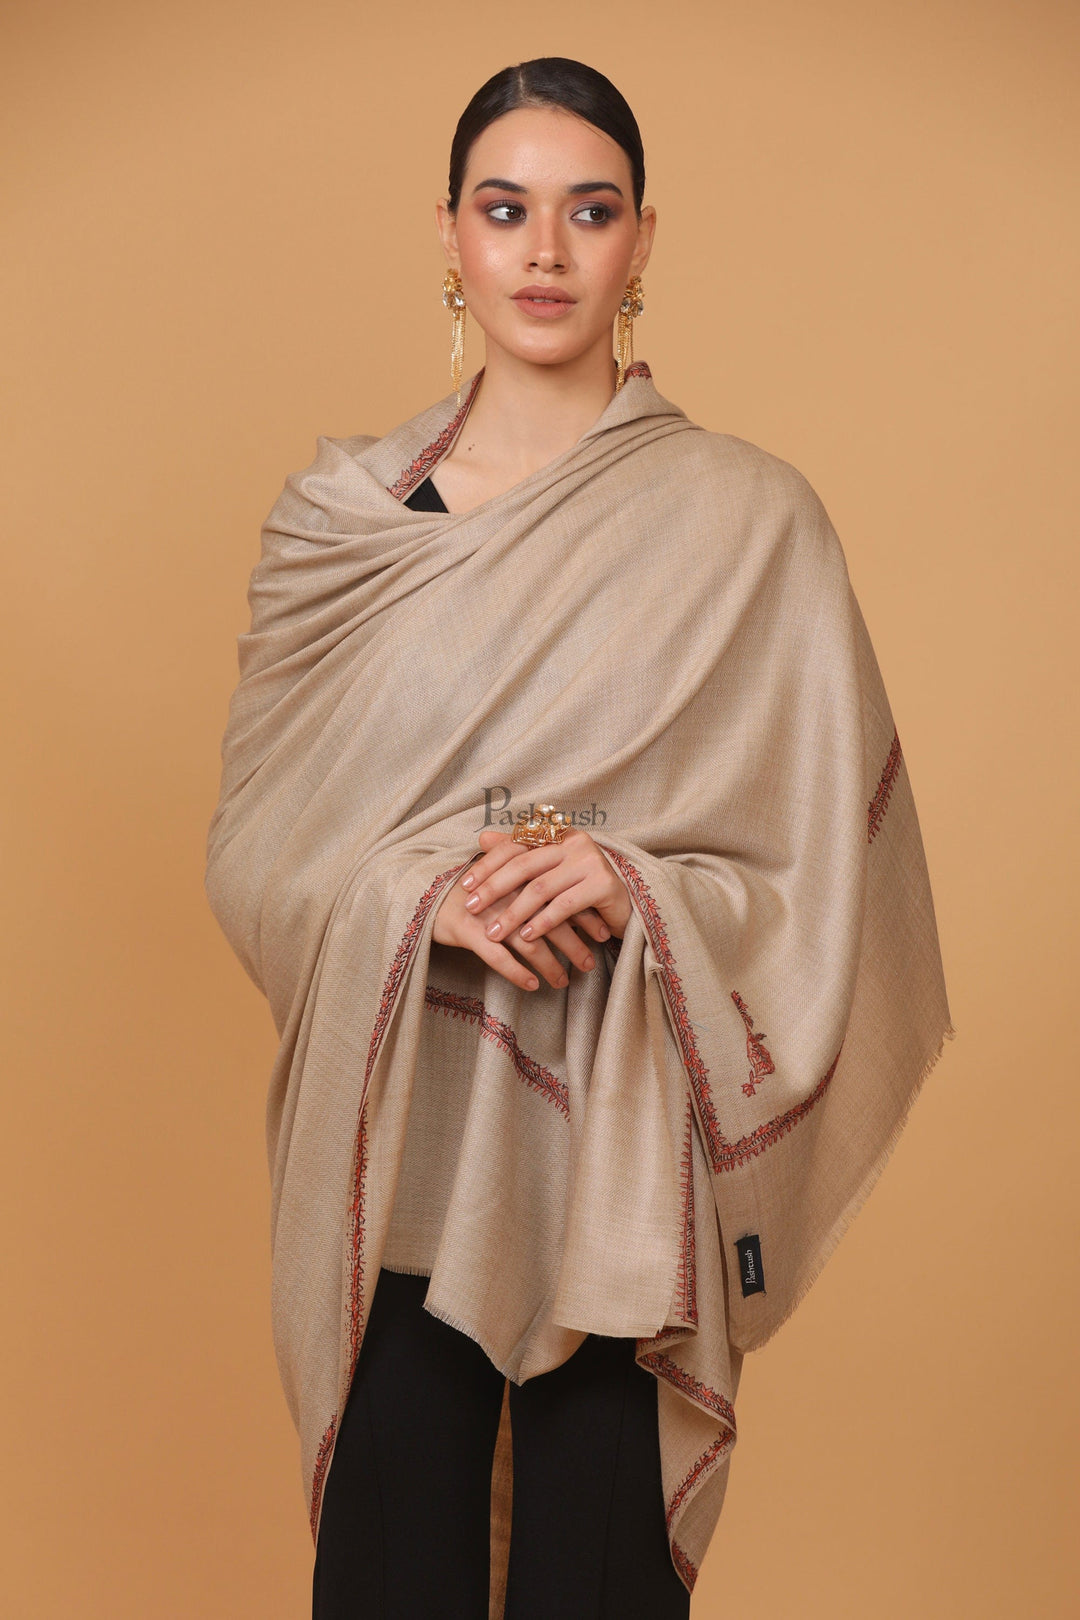 Pashtush India Womens Stoles and Scarves Scarf Pashtush womens Fine Wool shawl, 100% HAND EMBROIDERY KINGRI design, Taupe